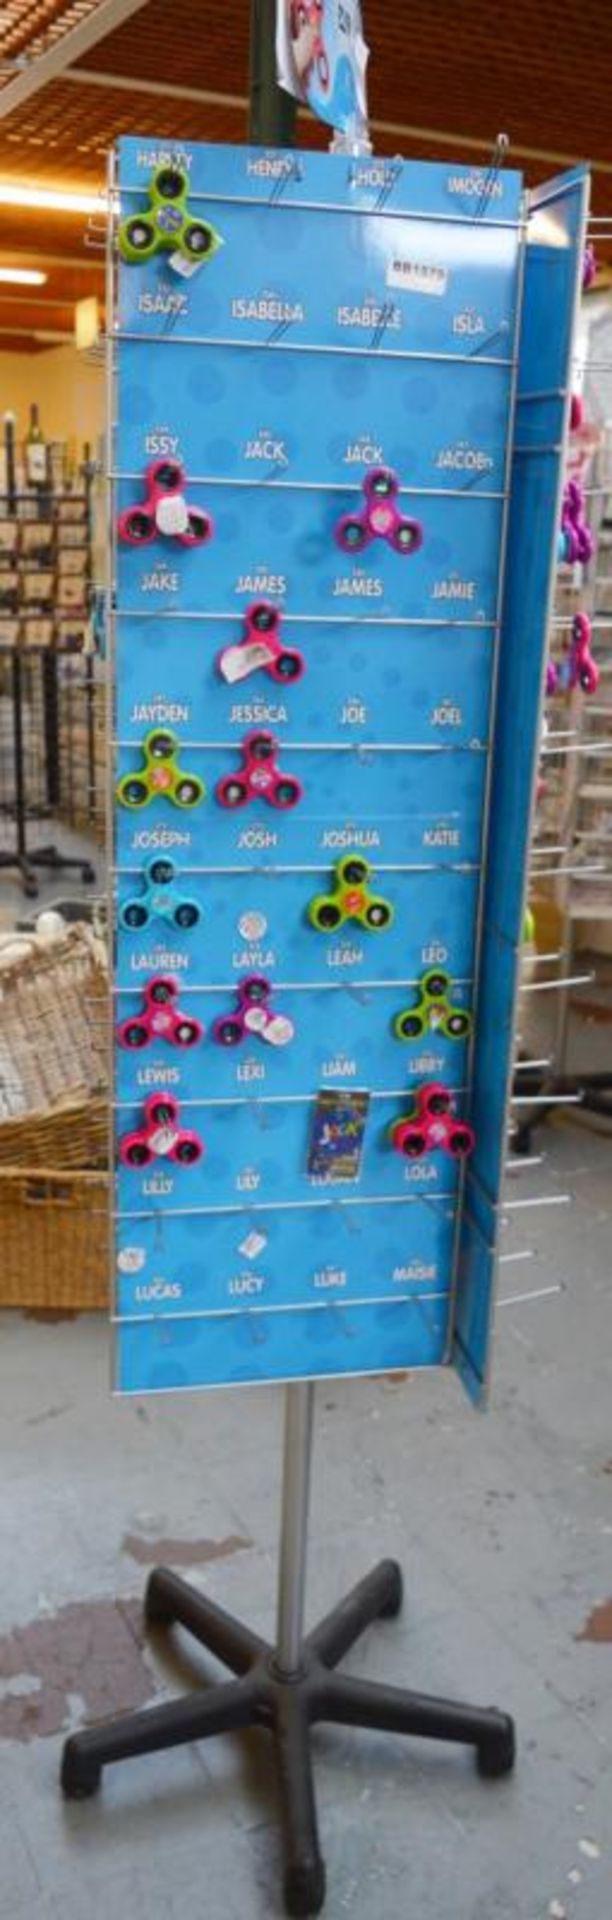 1 x Retail Carousel Display Stand With Approx 130 x Personalised Fidget Spinners - Unused Stock - Re